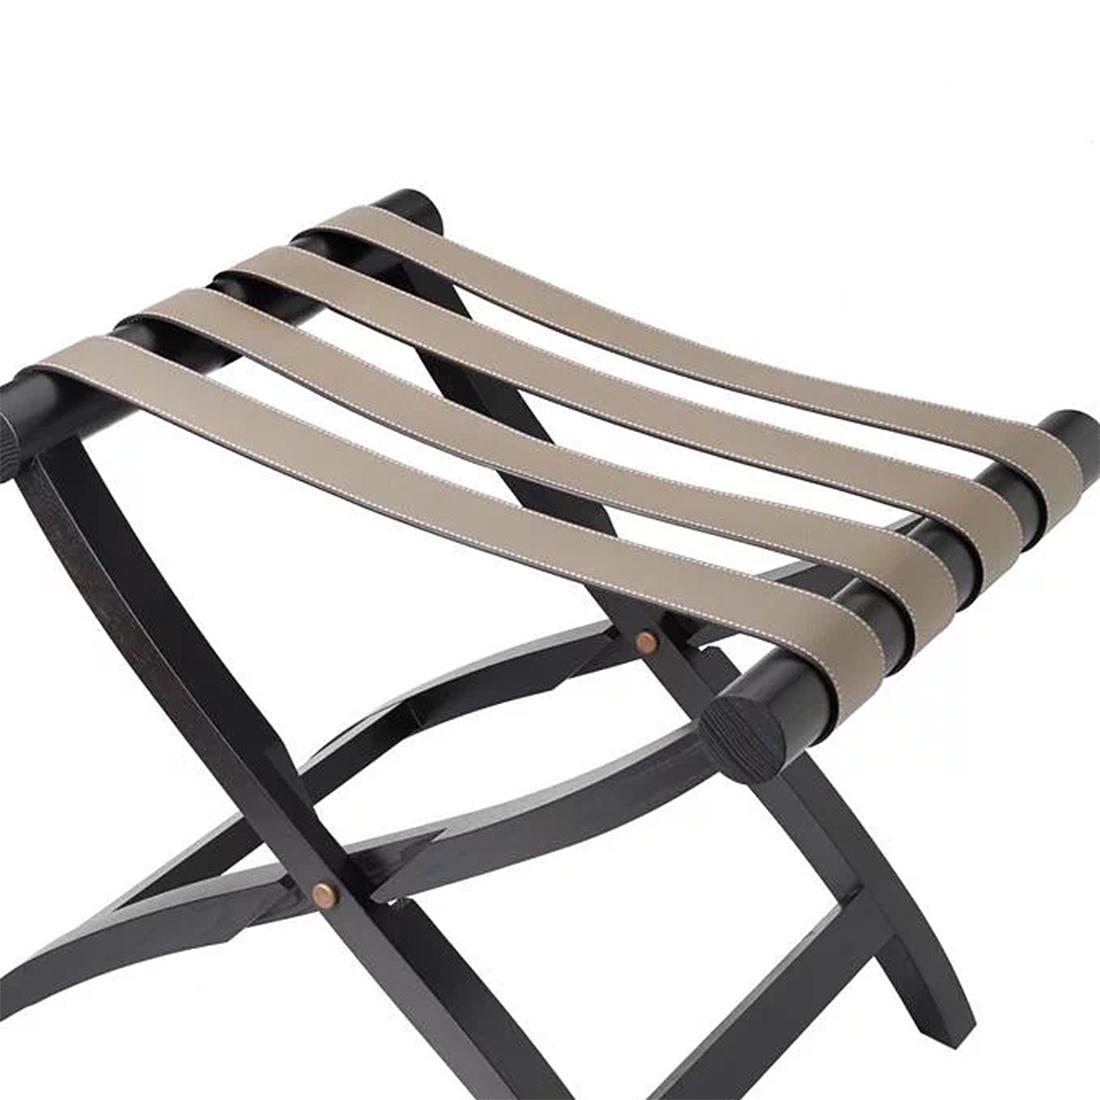 Luggage rack noble with folding solid oak
wood base structure in black finish. With 4
genuine leather stripes in beige finish. With
brass hardware details.
Also available in natural oak finish or in walnut
finish, on request.